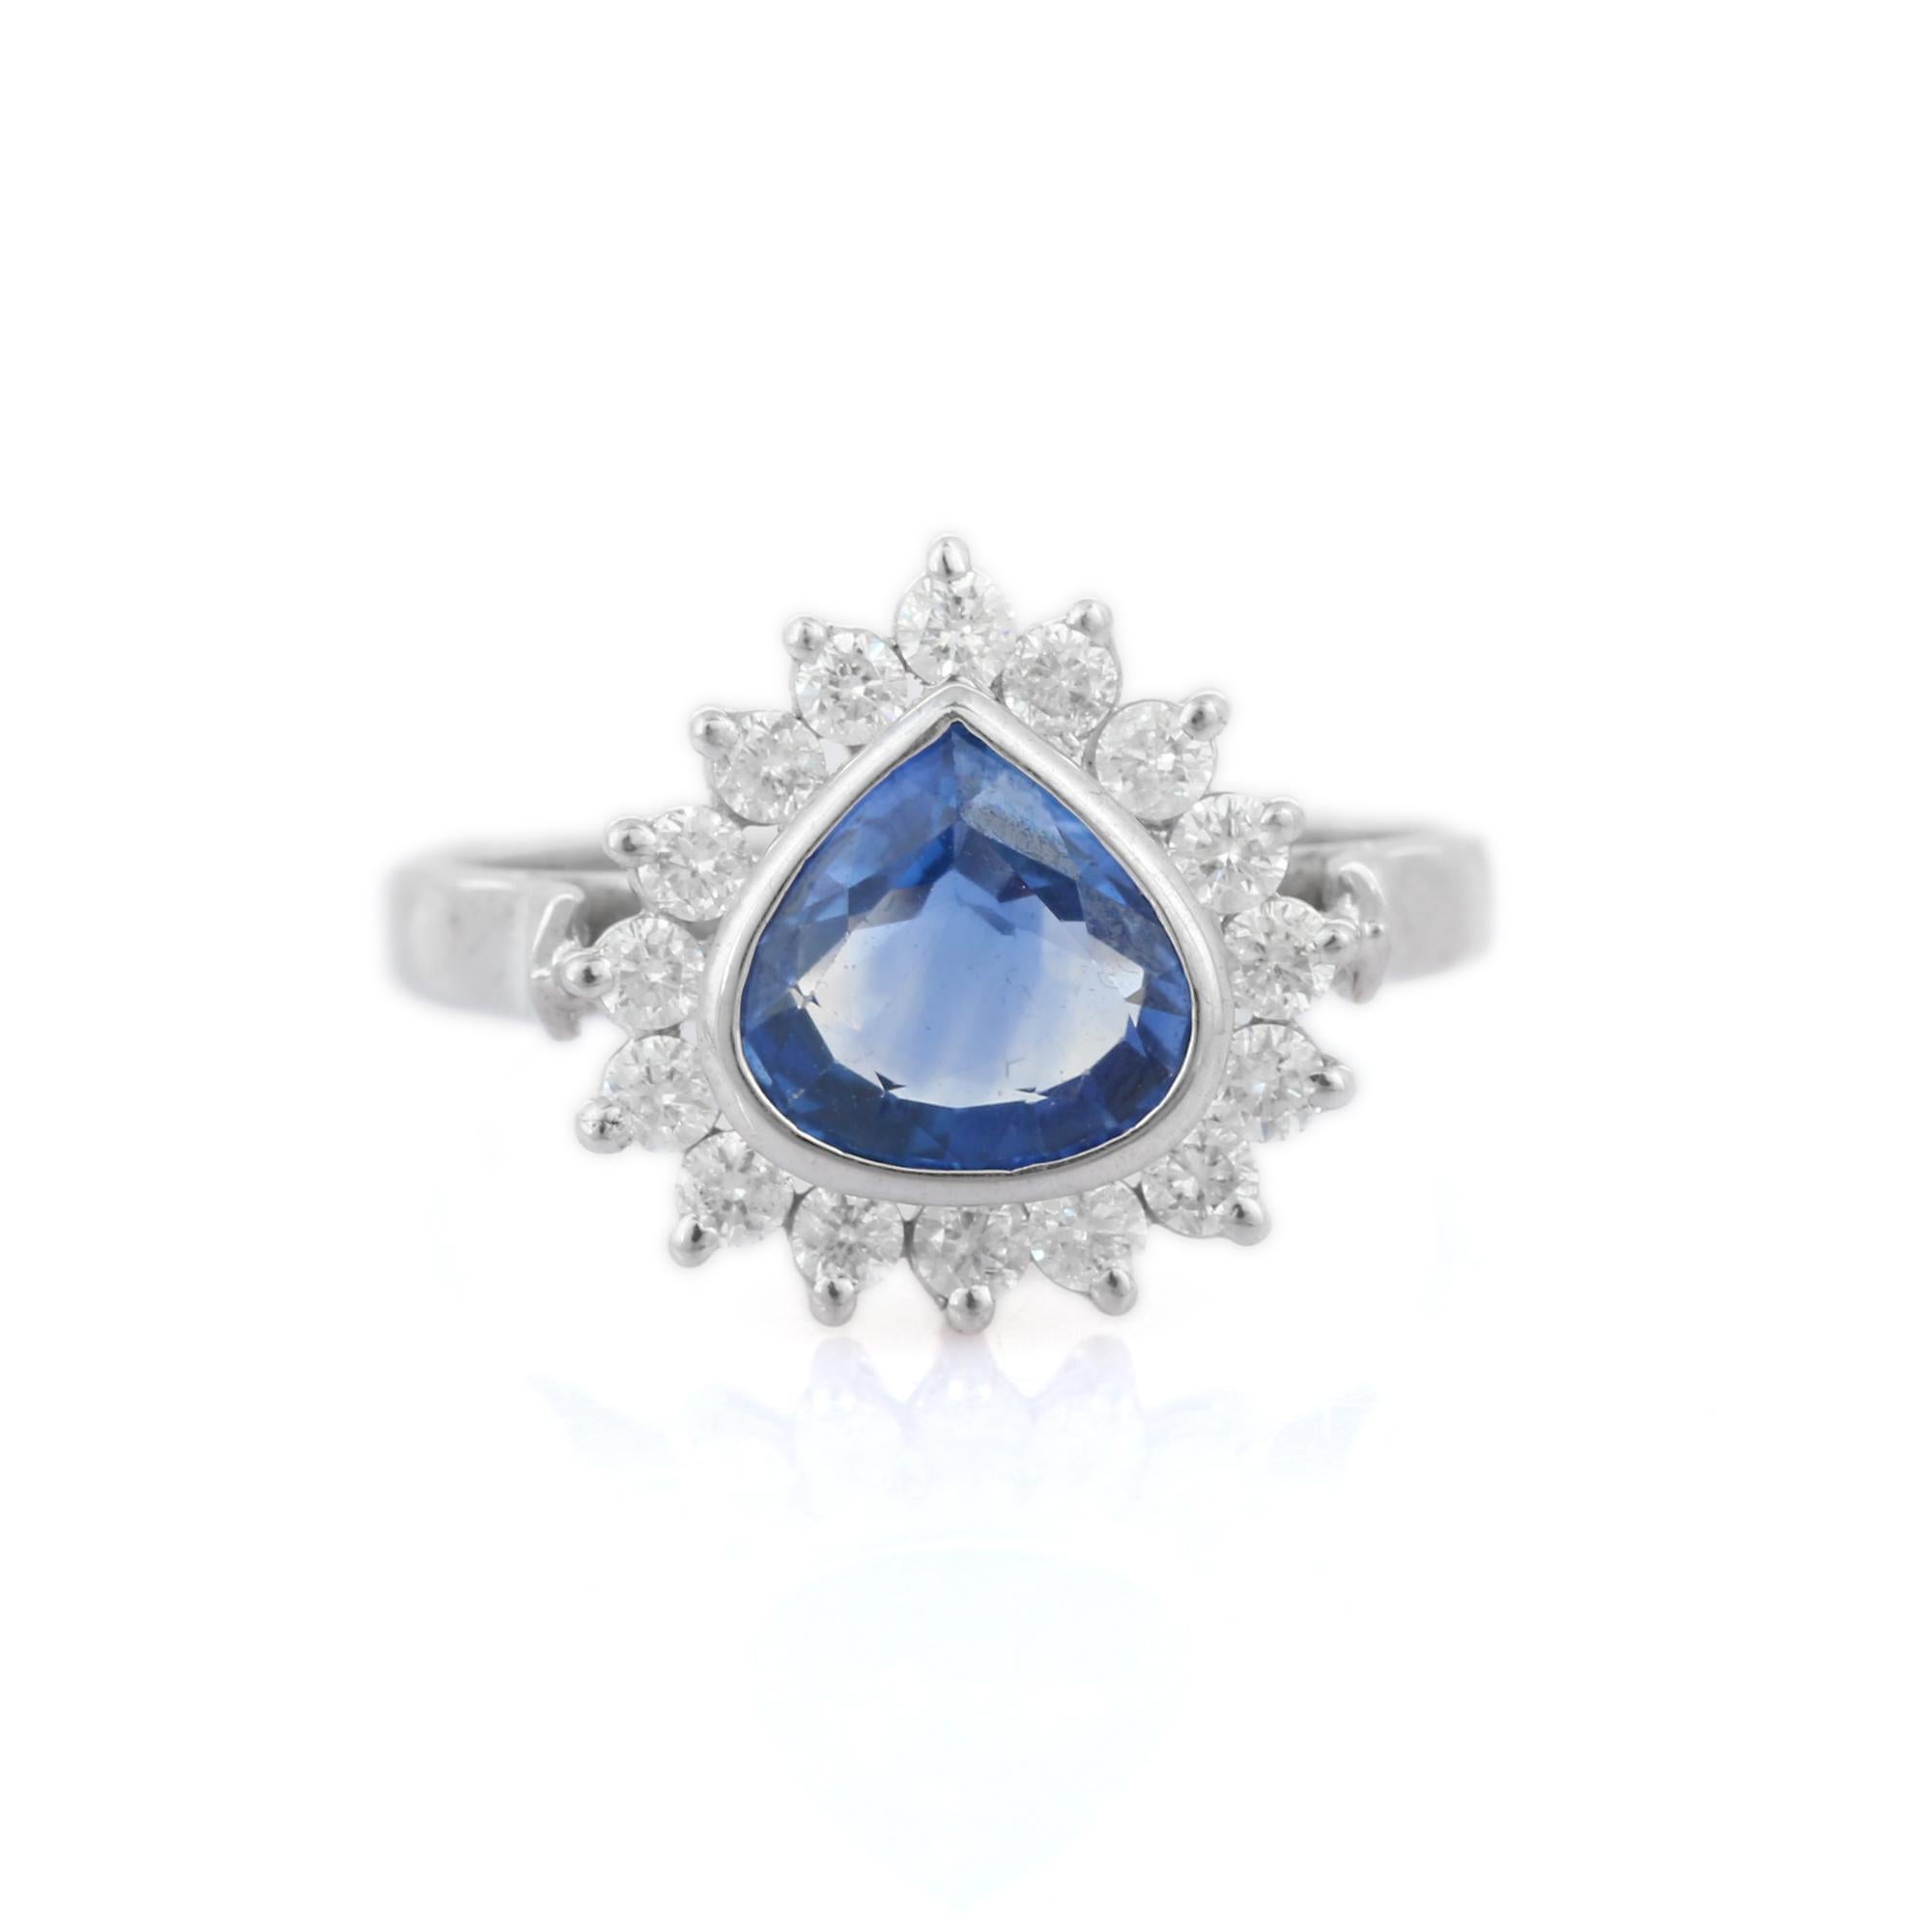 For Sale:  2.05 ct Blue Sapphire and Diamond Halo Engagement Ring in 18K White Gold 6